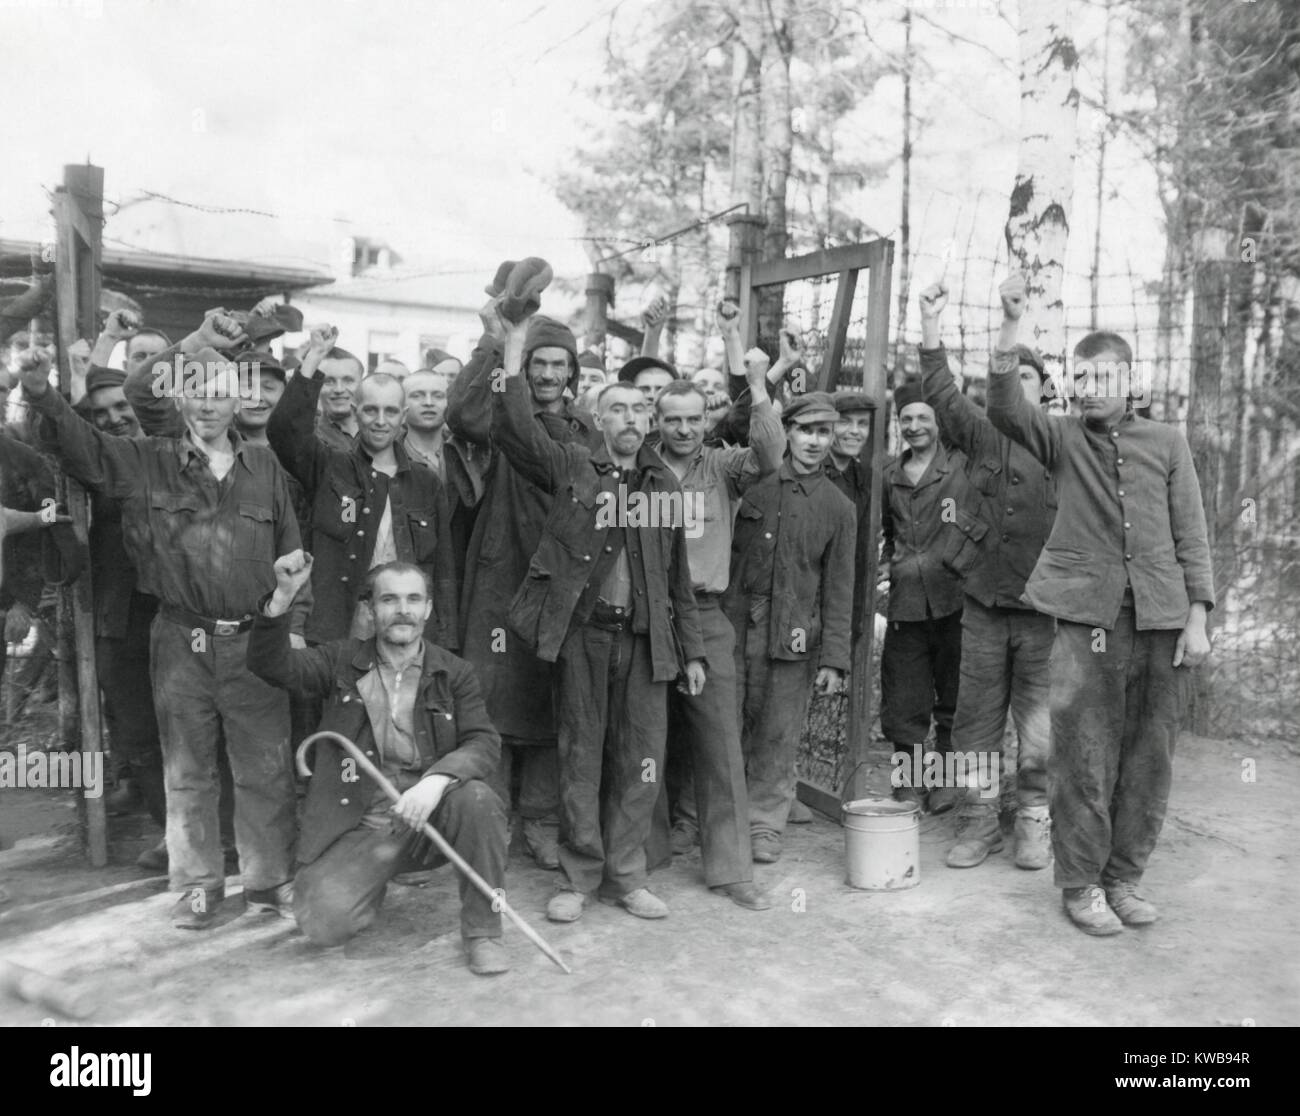 Allied POW cheer their liberty after being freed near Homburg, Germany, by 7th U.S. Army troops. Some of the Russians, Czechs, Poles, and French had been prisoners for three years. March 22, 1945. World War 2. (BSLOC 2014 10 184) Stock Photo